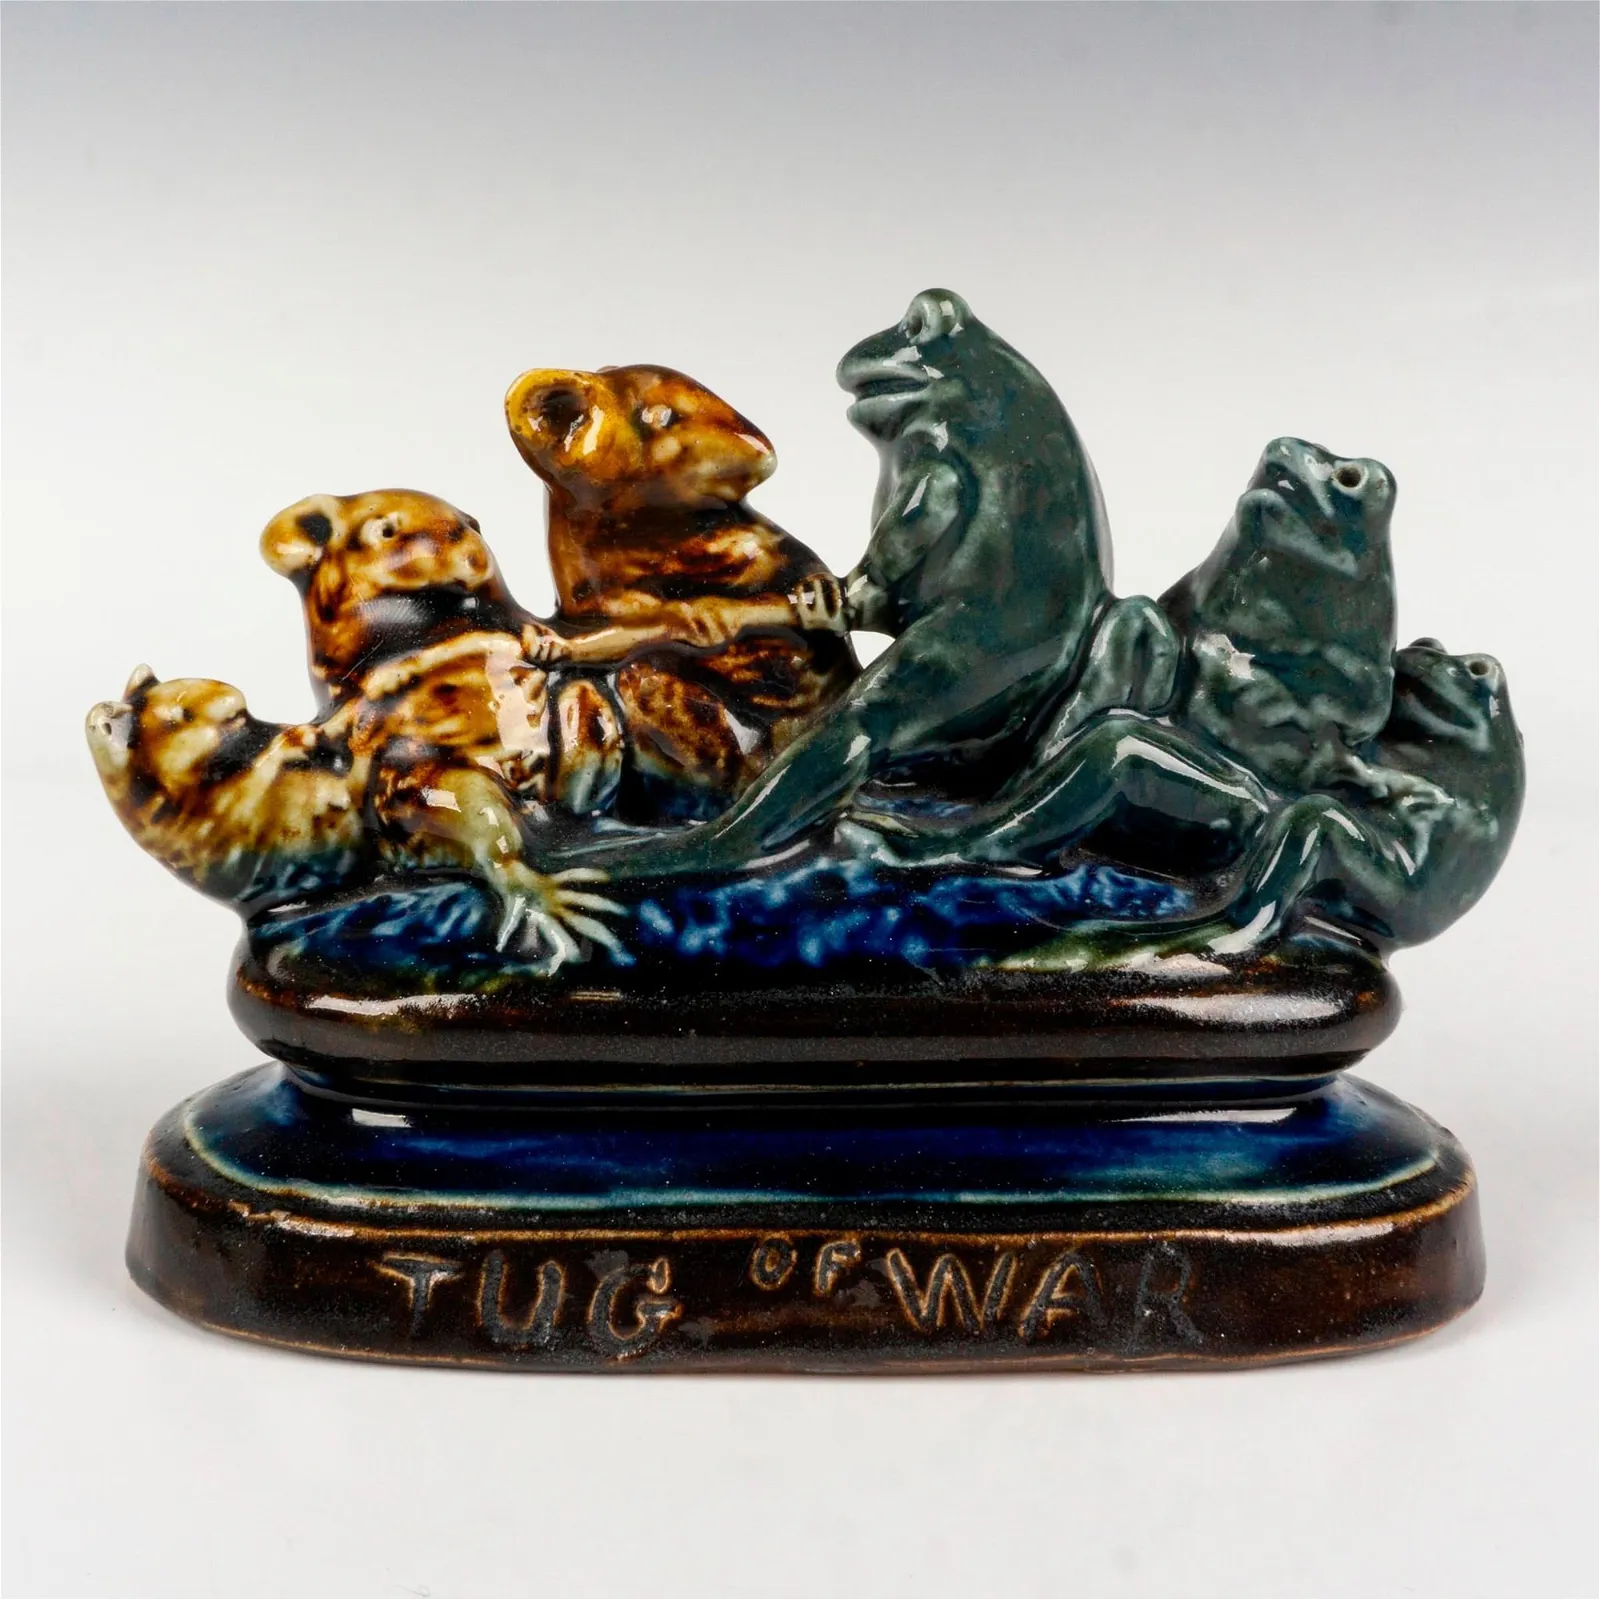 Doulton Lambeth saltglaze figure of mice and frogs playing tug of war by George Tinworth. Estimate $7,000-$10,000 at Lion and Unicorn.